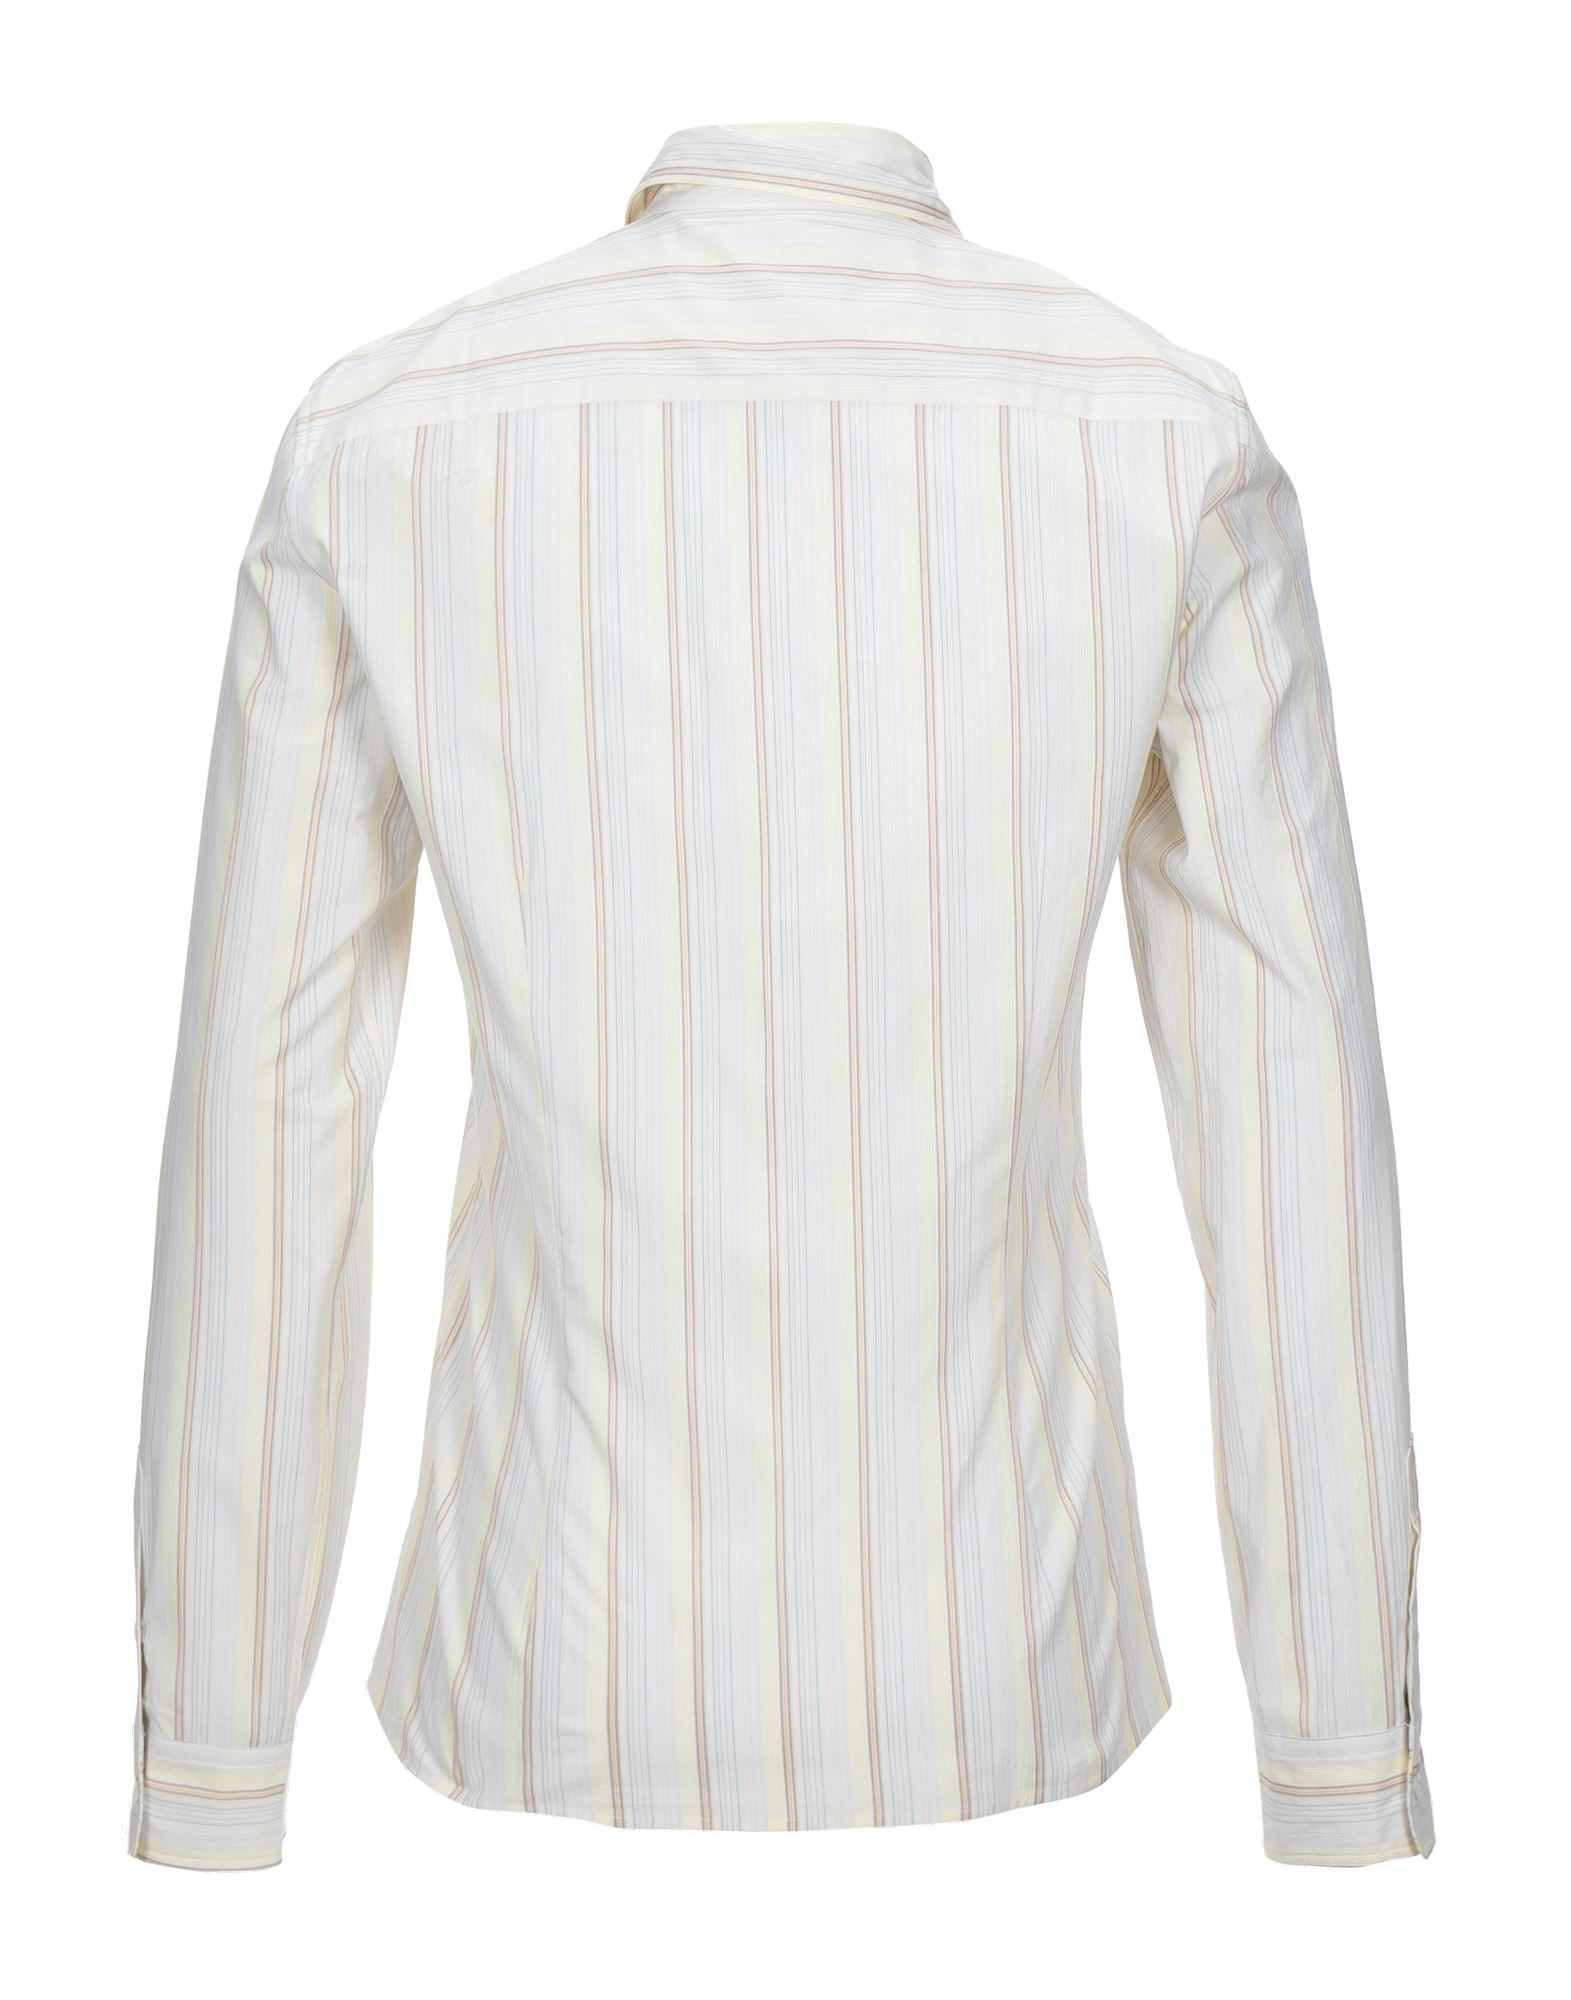 plain weave, embroidered detailing, stripes, front closure, button closing, long sleeves, buttoned cuffs, classic neckline, no pockets, small sized